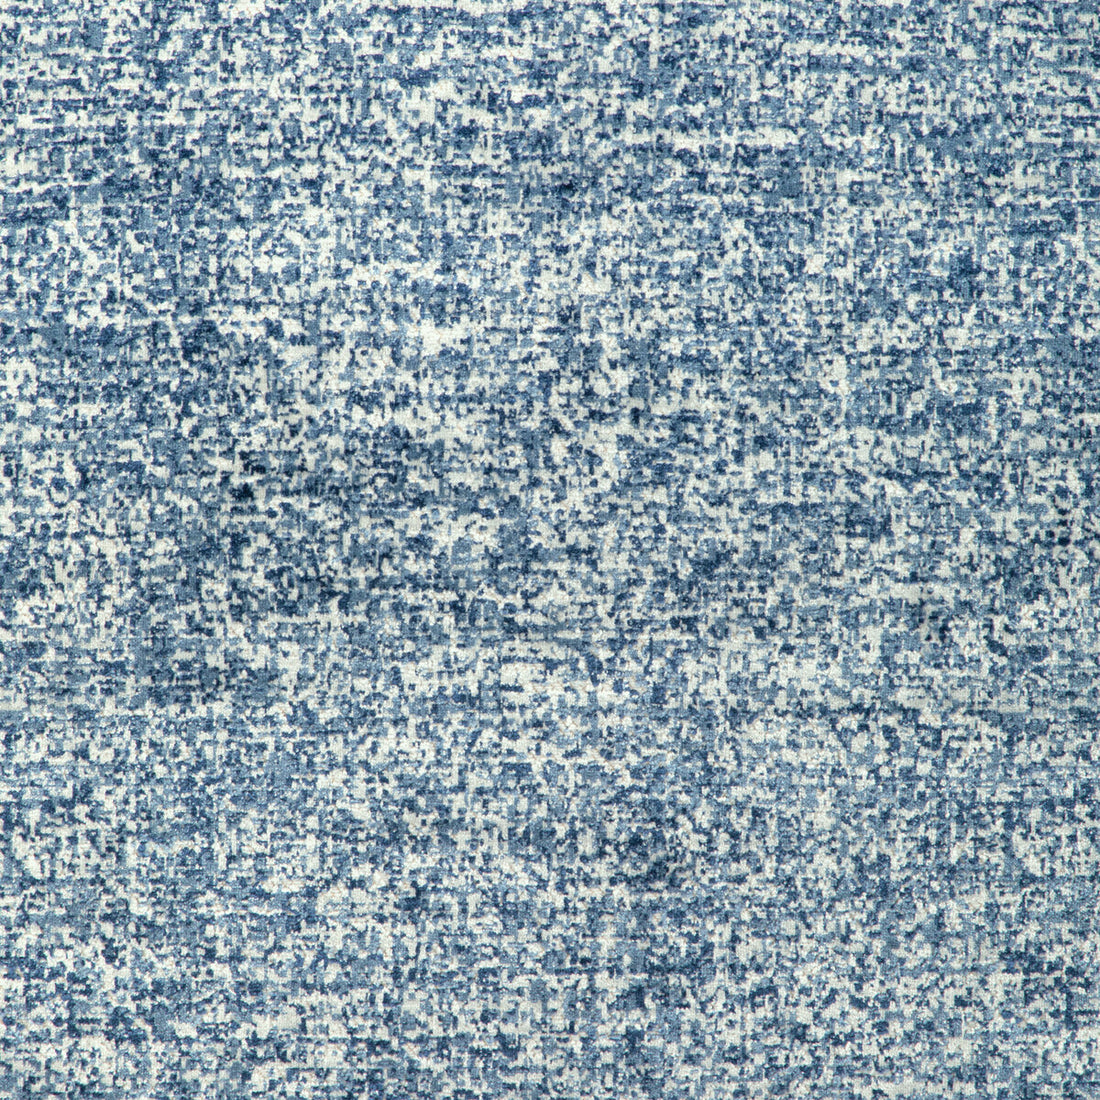 Giusuppe fabric in ink color - pattern 36954.5.0 - by Kravet Basics in the Mid-Century Modern collection